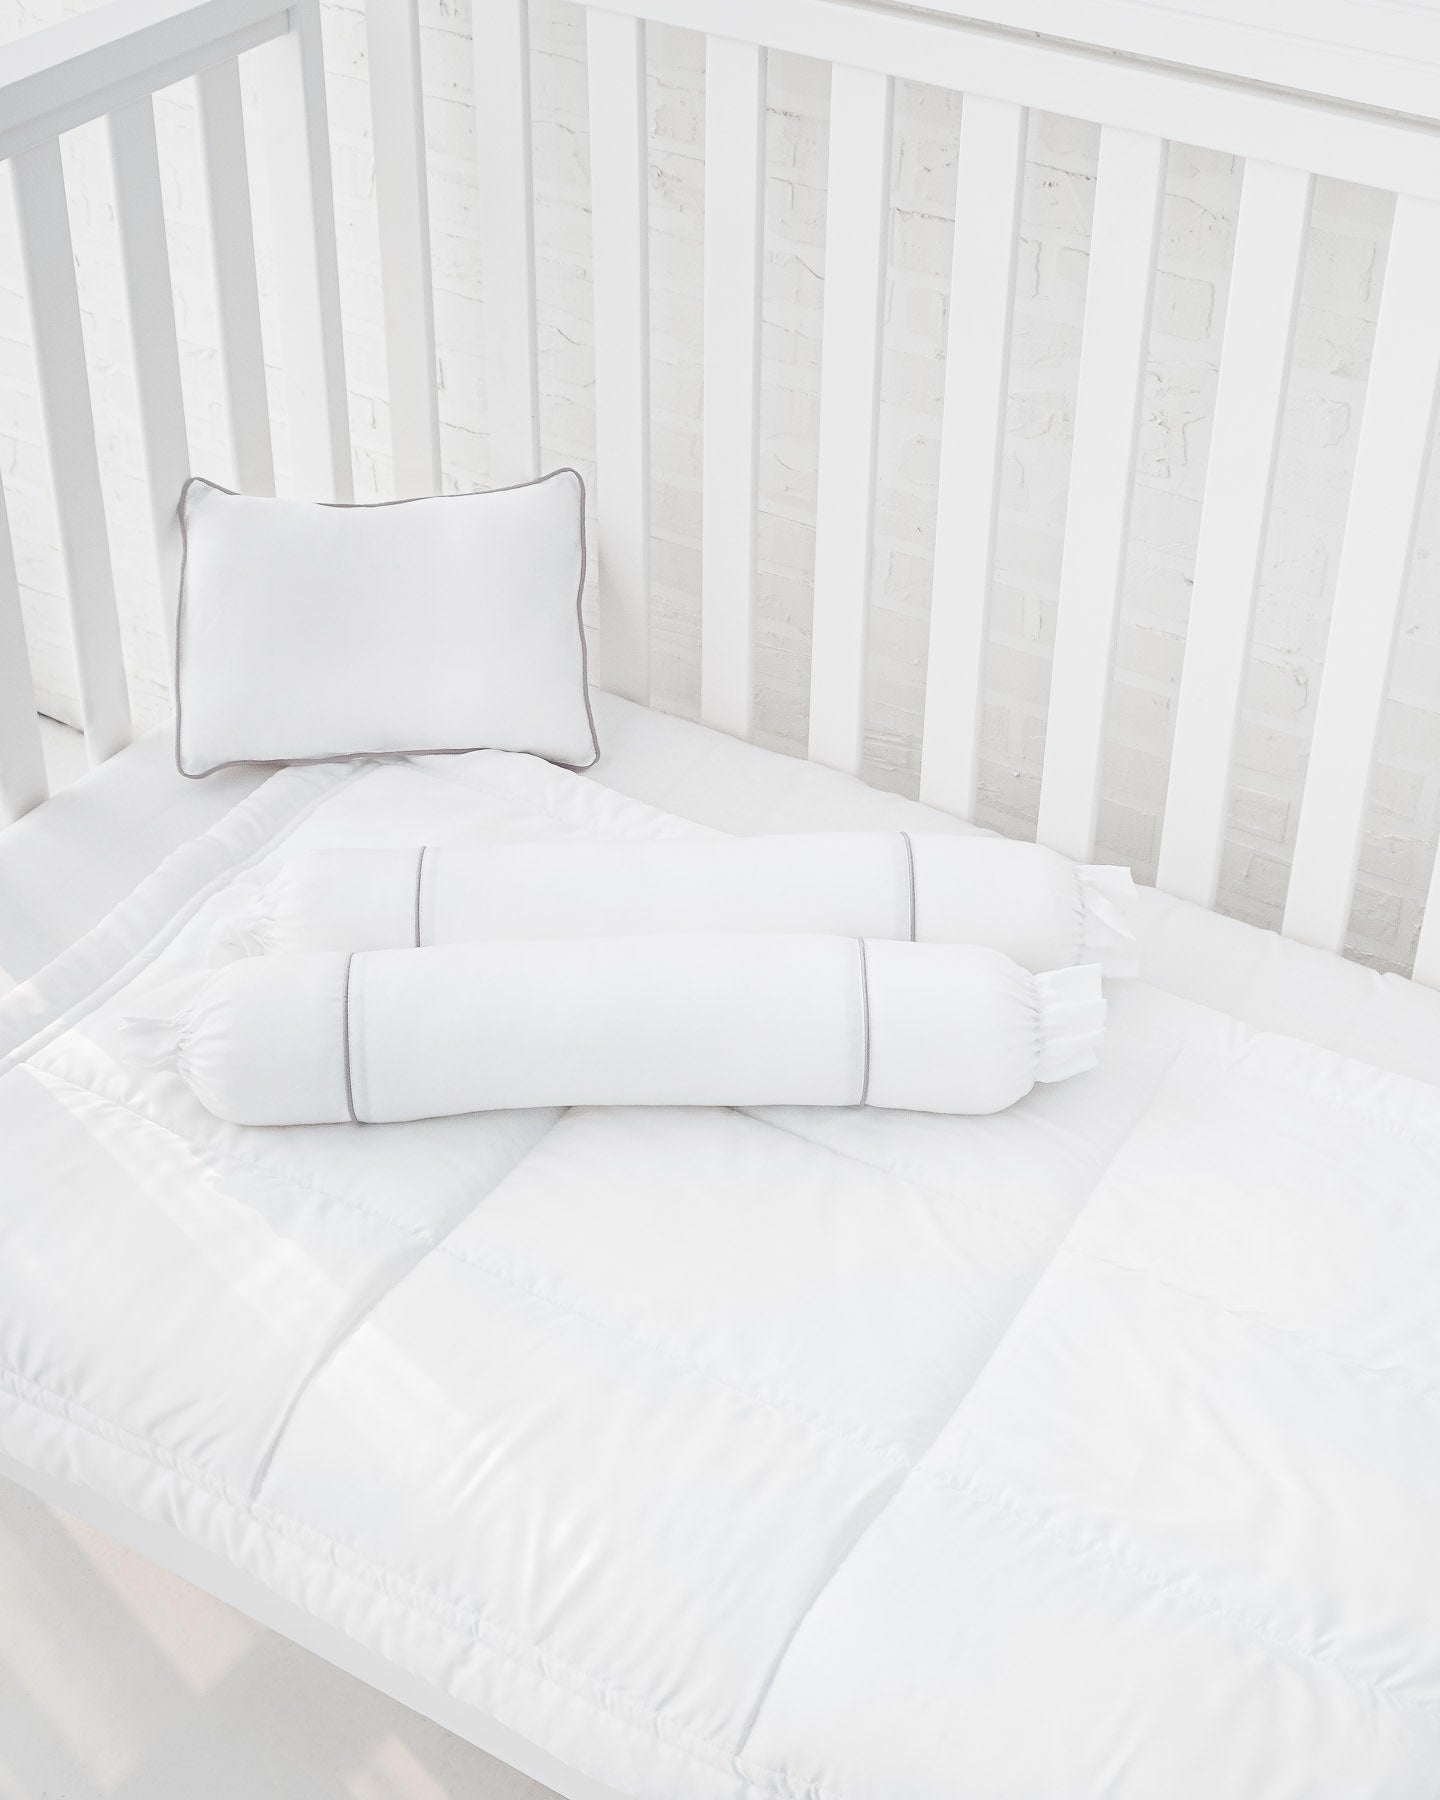 White crib with white organic bamboo lyocell baby bedding (baby comforter set - 1 pillowcase, 2 bolstercases, 1 comforter; baby pillow set - 1 headshaping pillow, 2 bolsters; crib fitted sheet) 